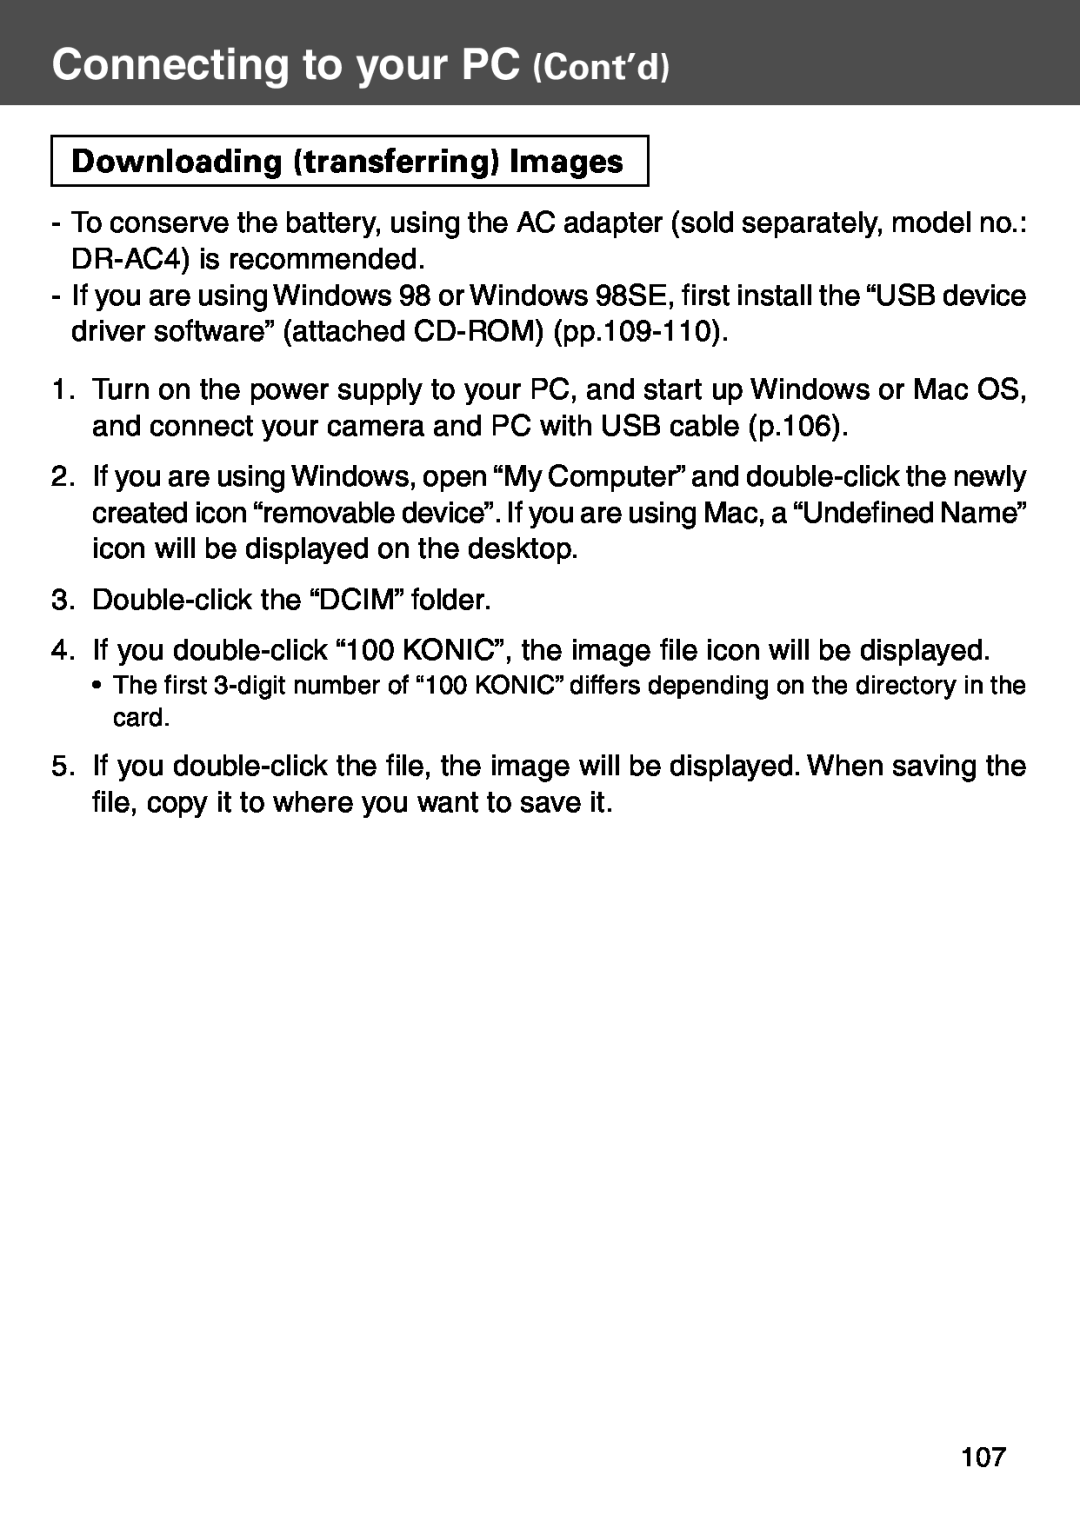 Konica Minolta KD-500Z user manual Downloading transferring Images, Connecting to your PC Cont’d 